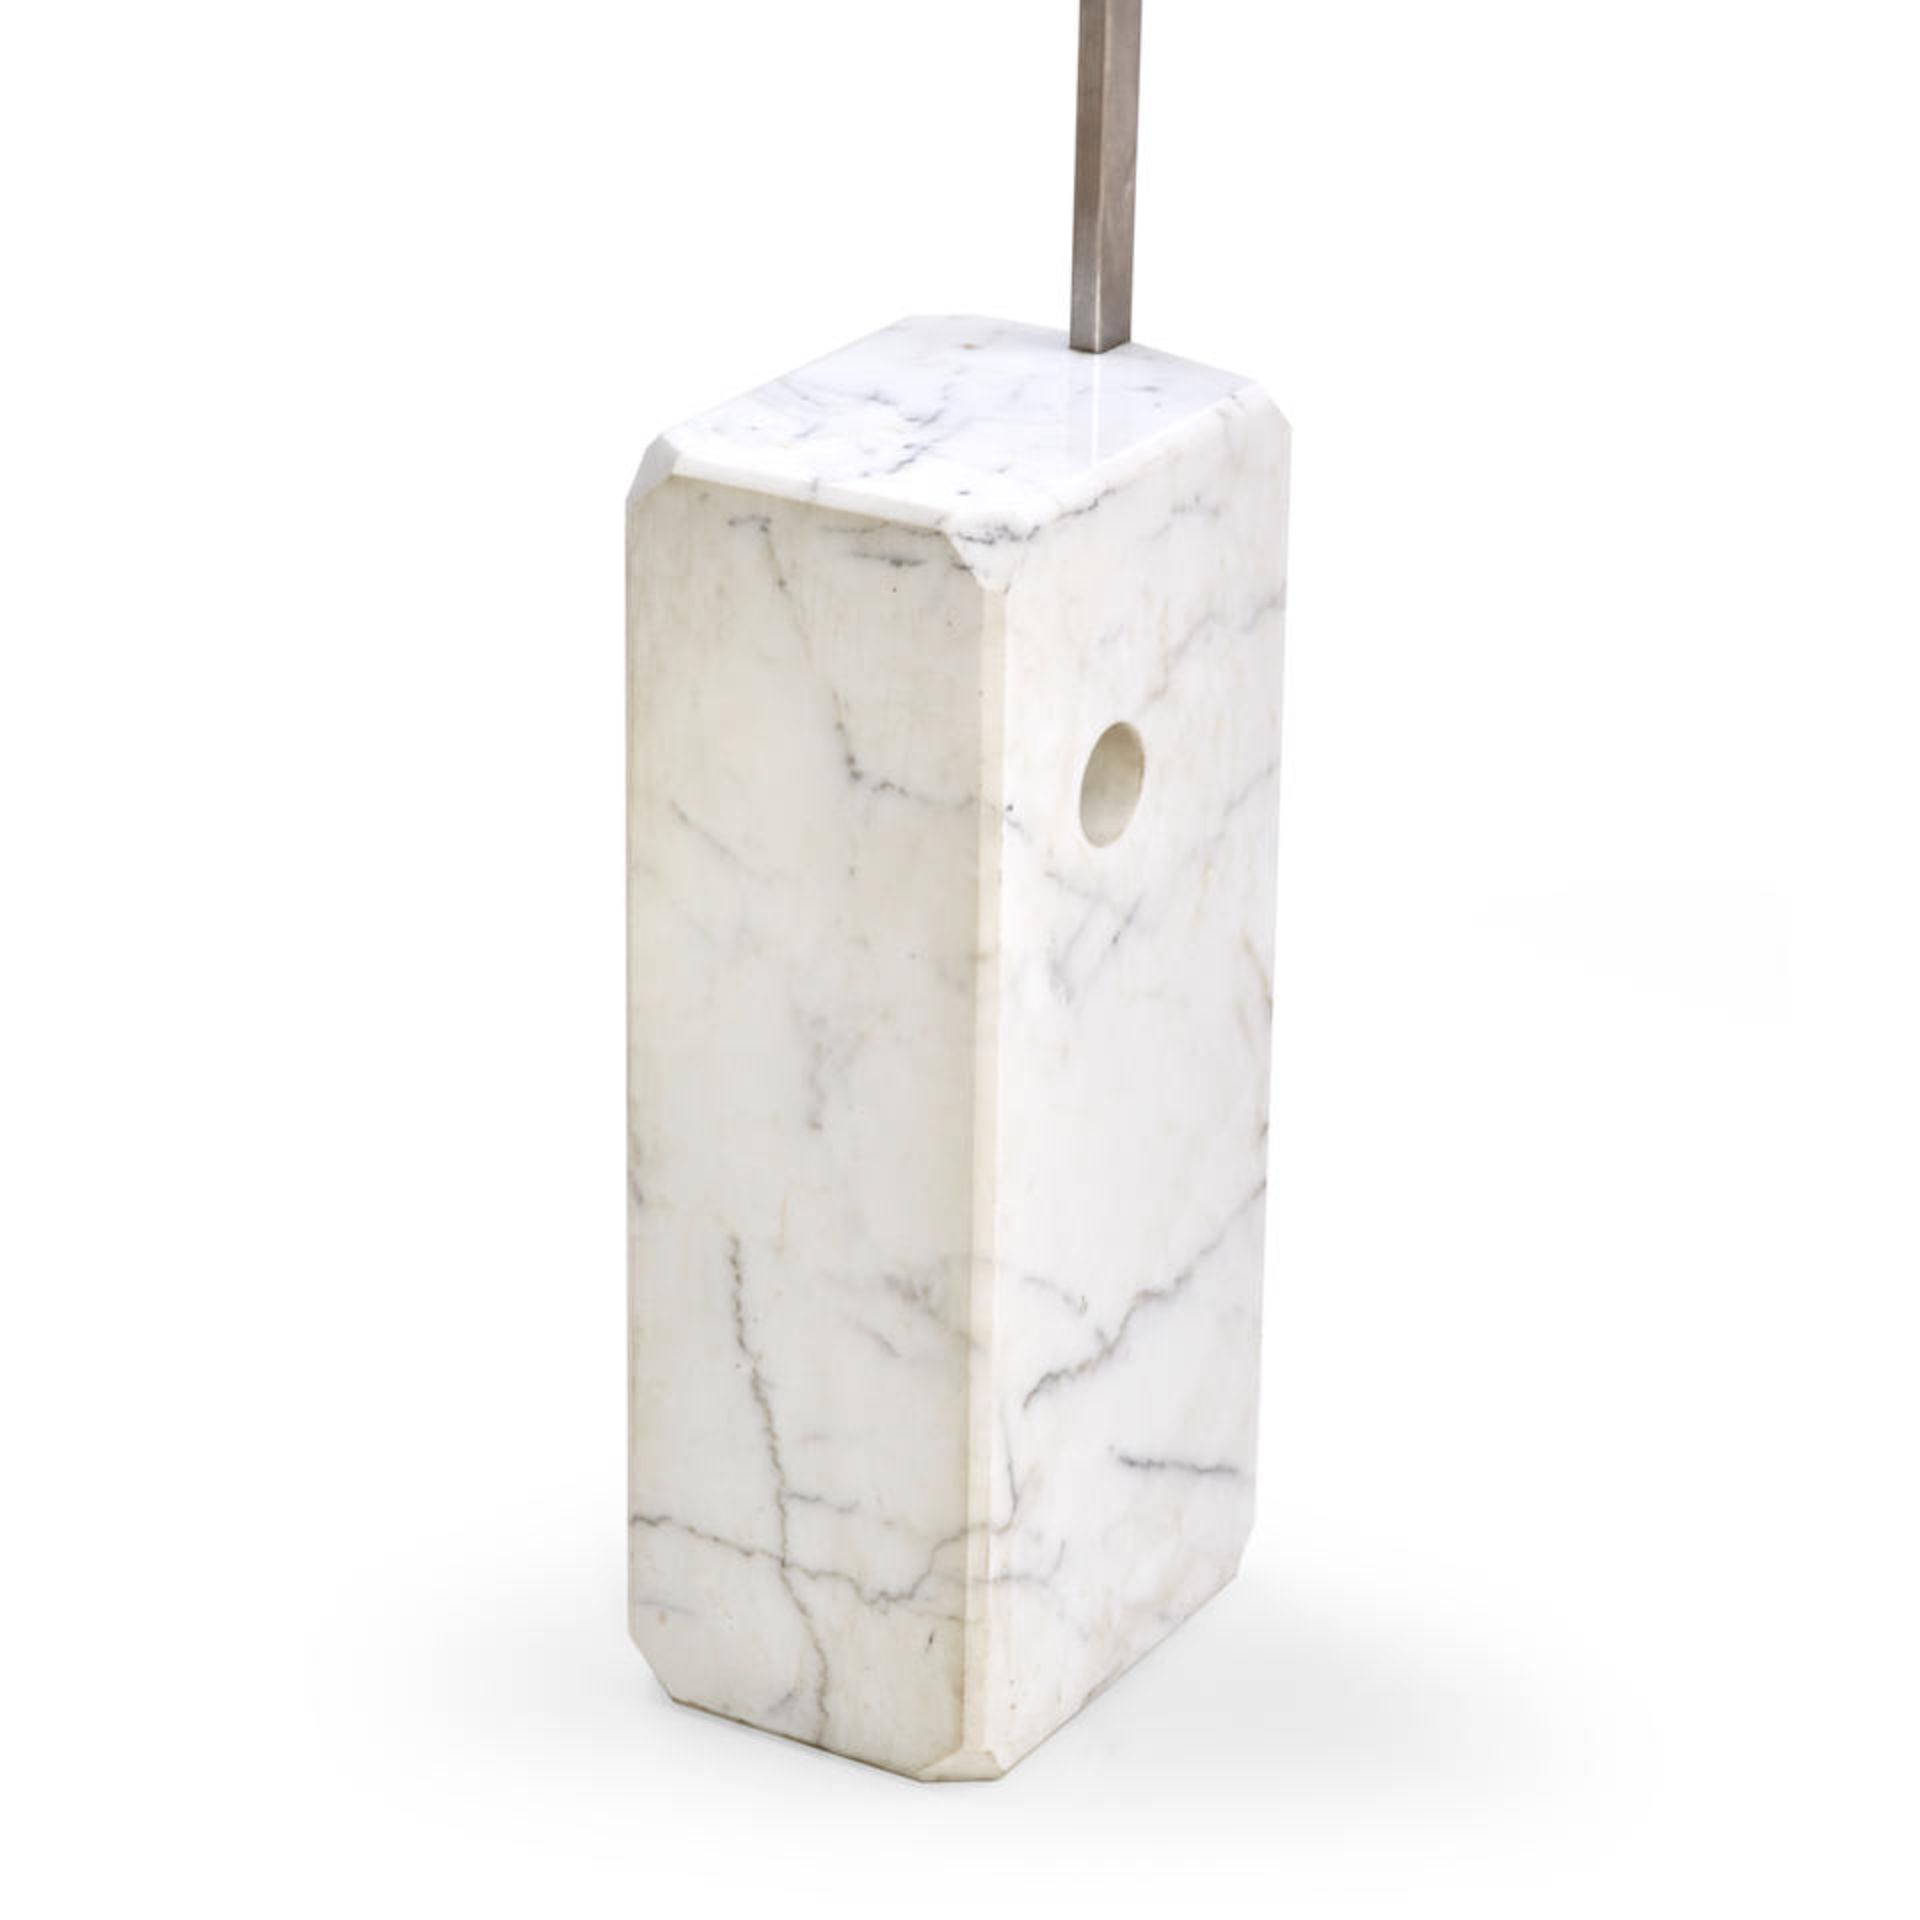 ACHILLE CASTIGLIONI (1918-2002) FOR FLOS ARCO FLOOR LAMP, Italy, mid-20th century, marble, steel... - Image 2 of 4